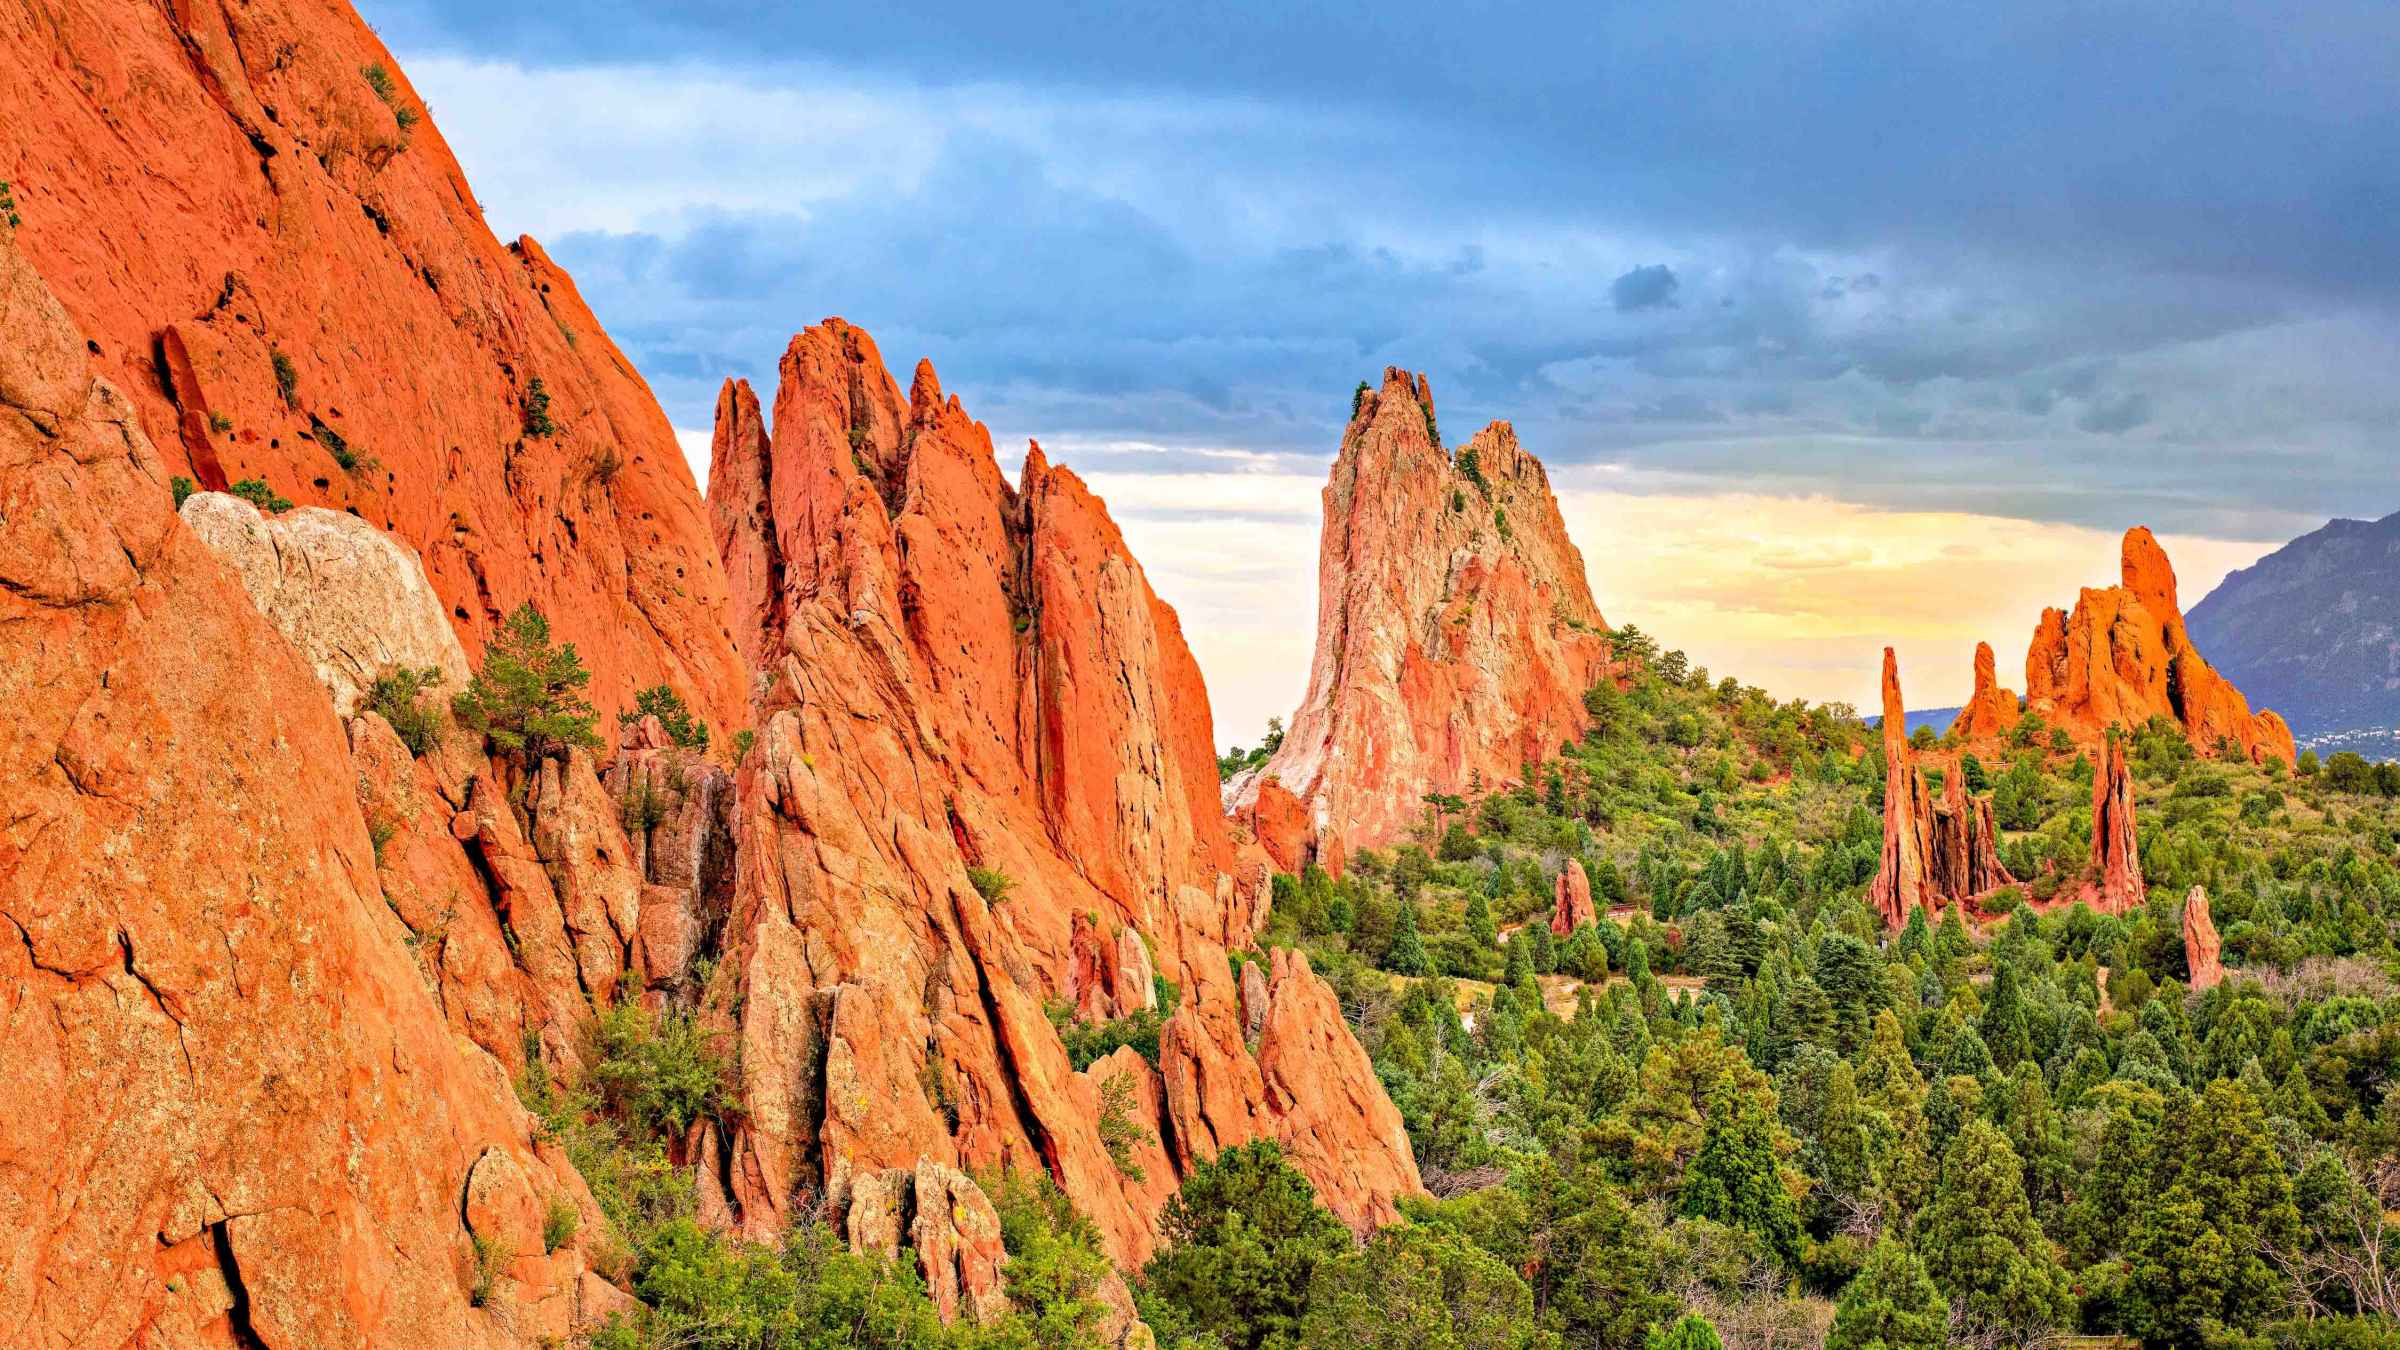 Colorado Springs 2021: Top 10 Tours & Activities (with Photos) - Things